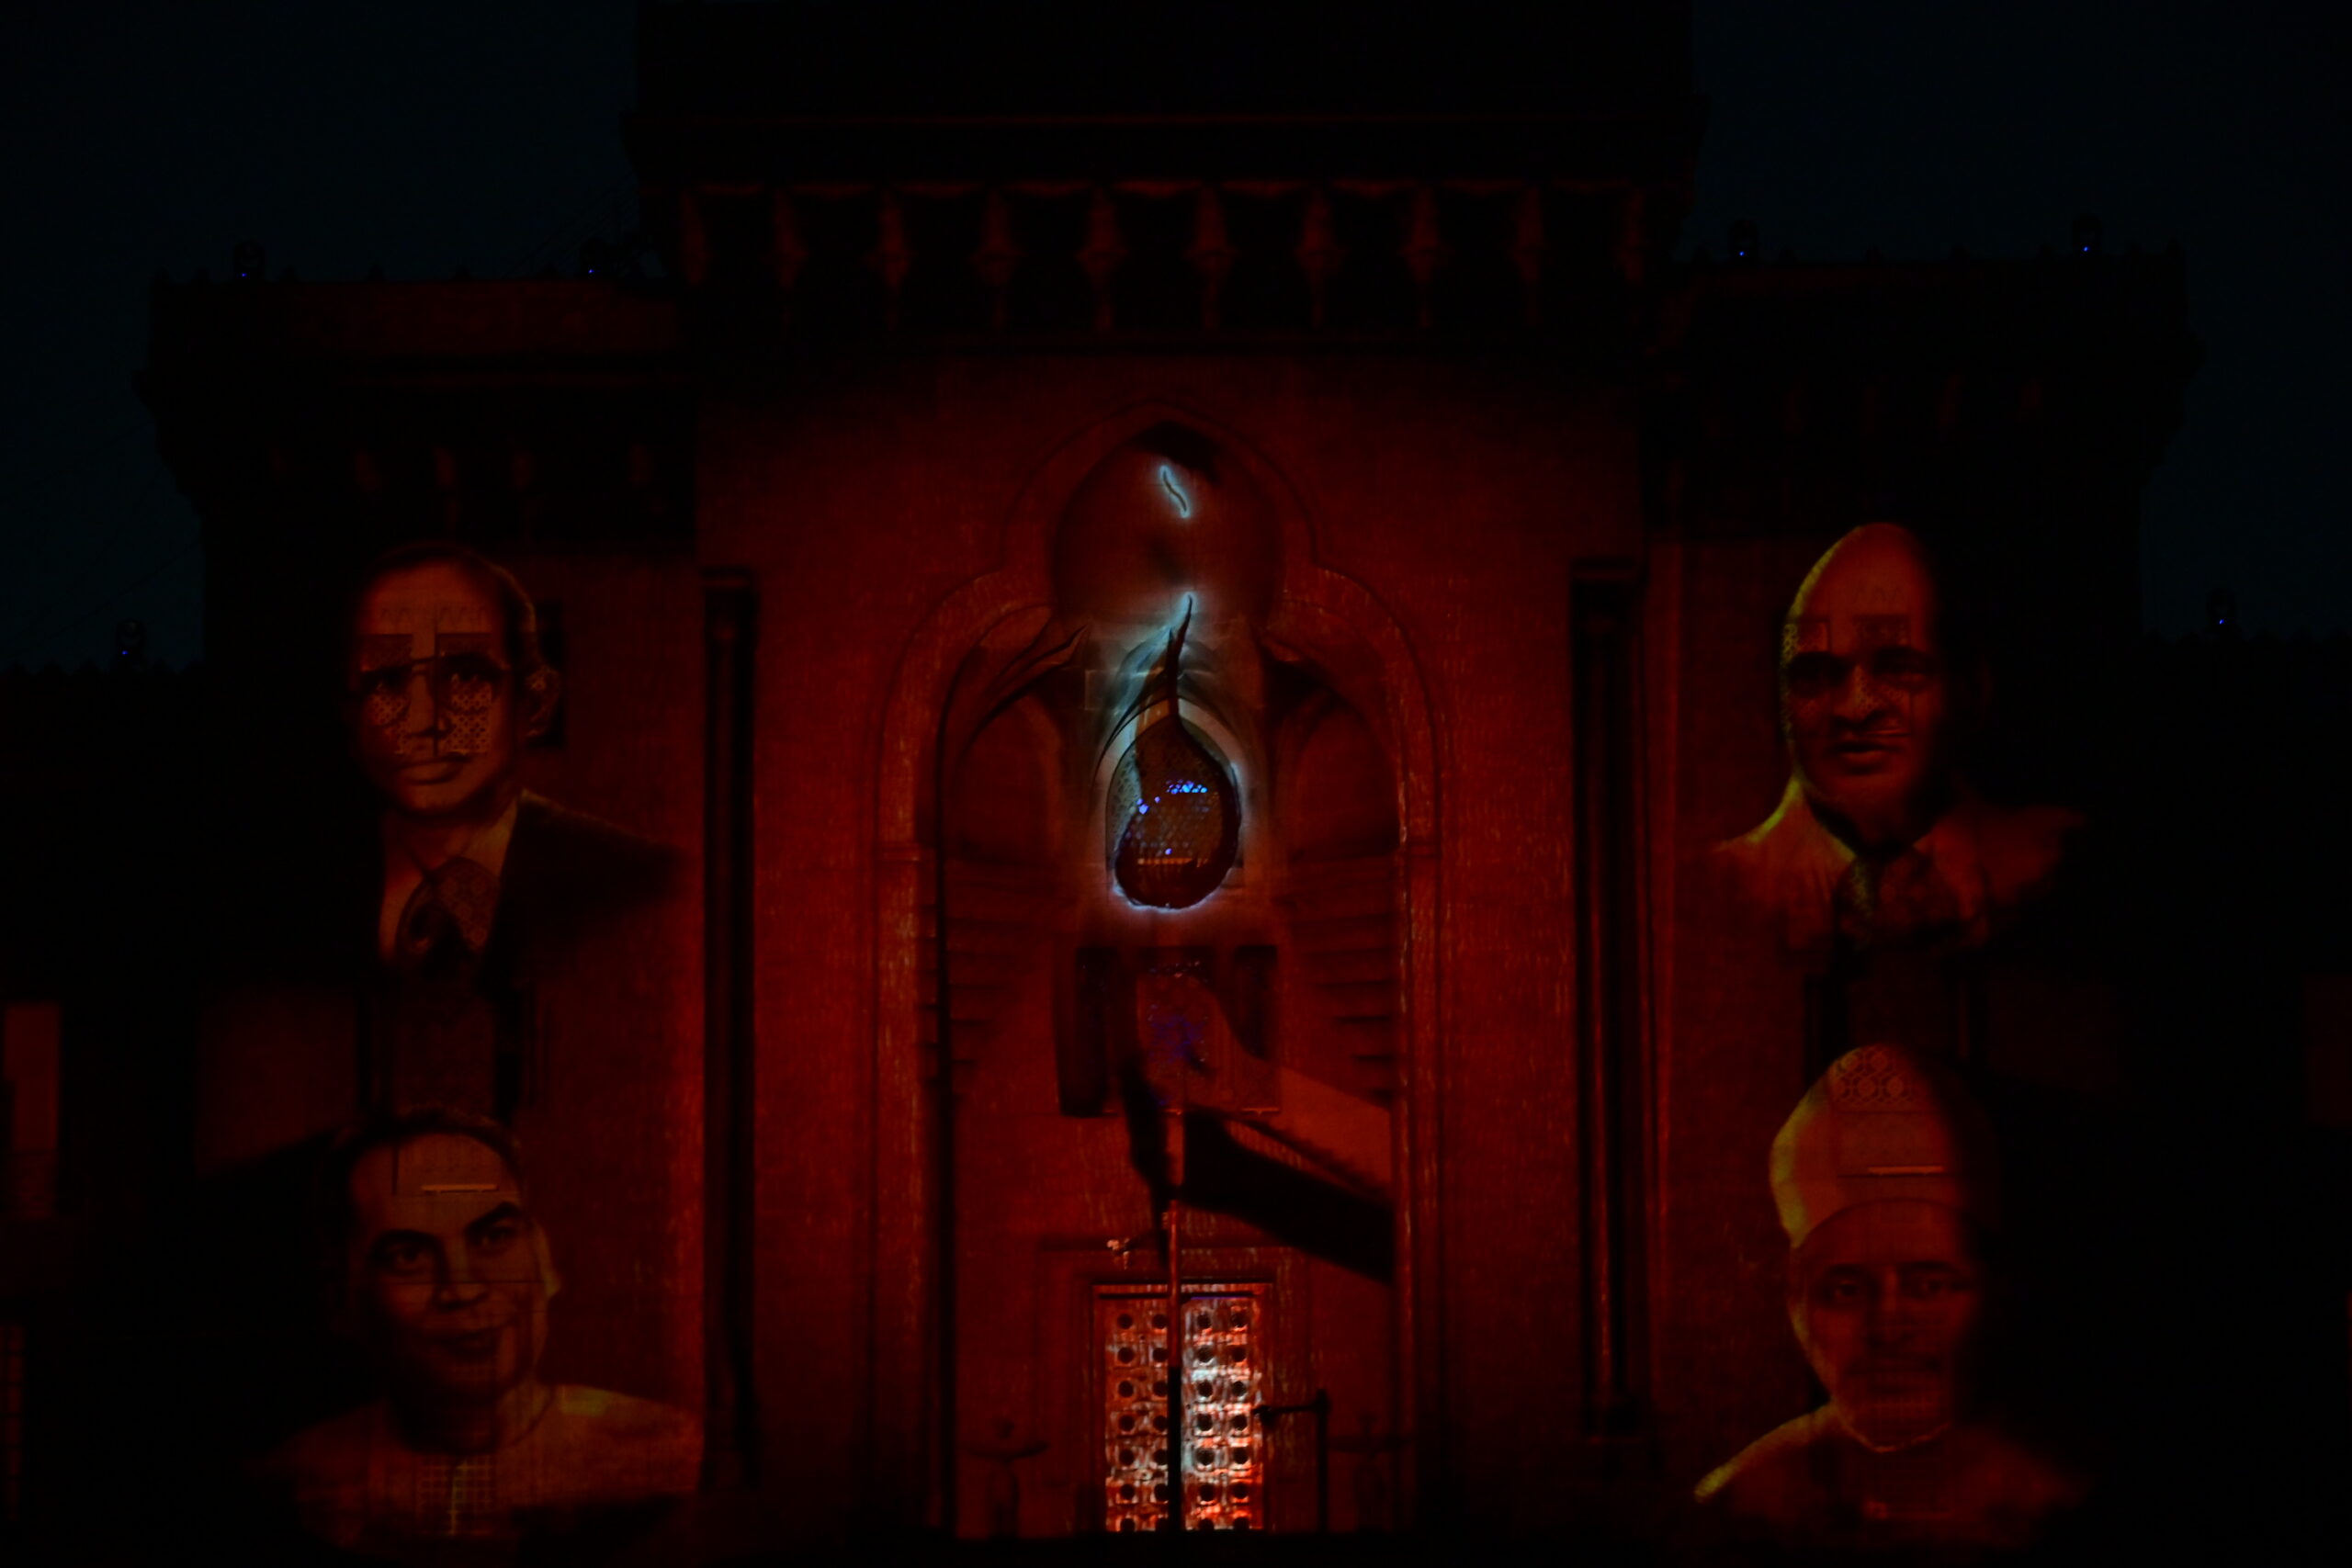 Dynamic Laser Show At Arts College In Osmania University (16)